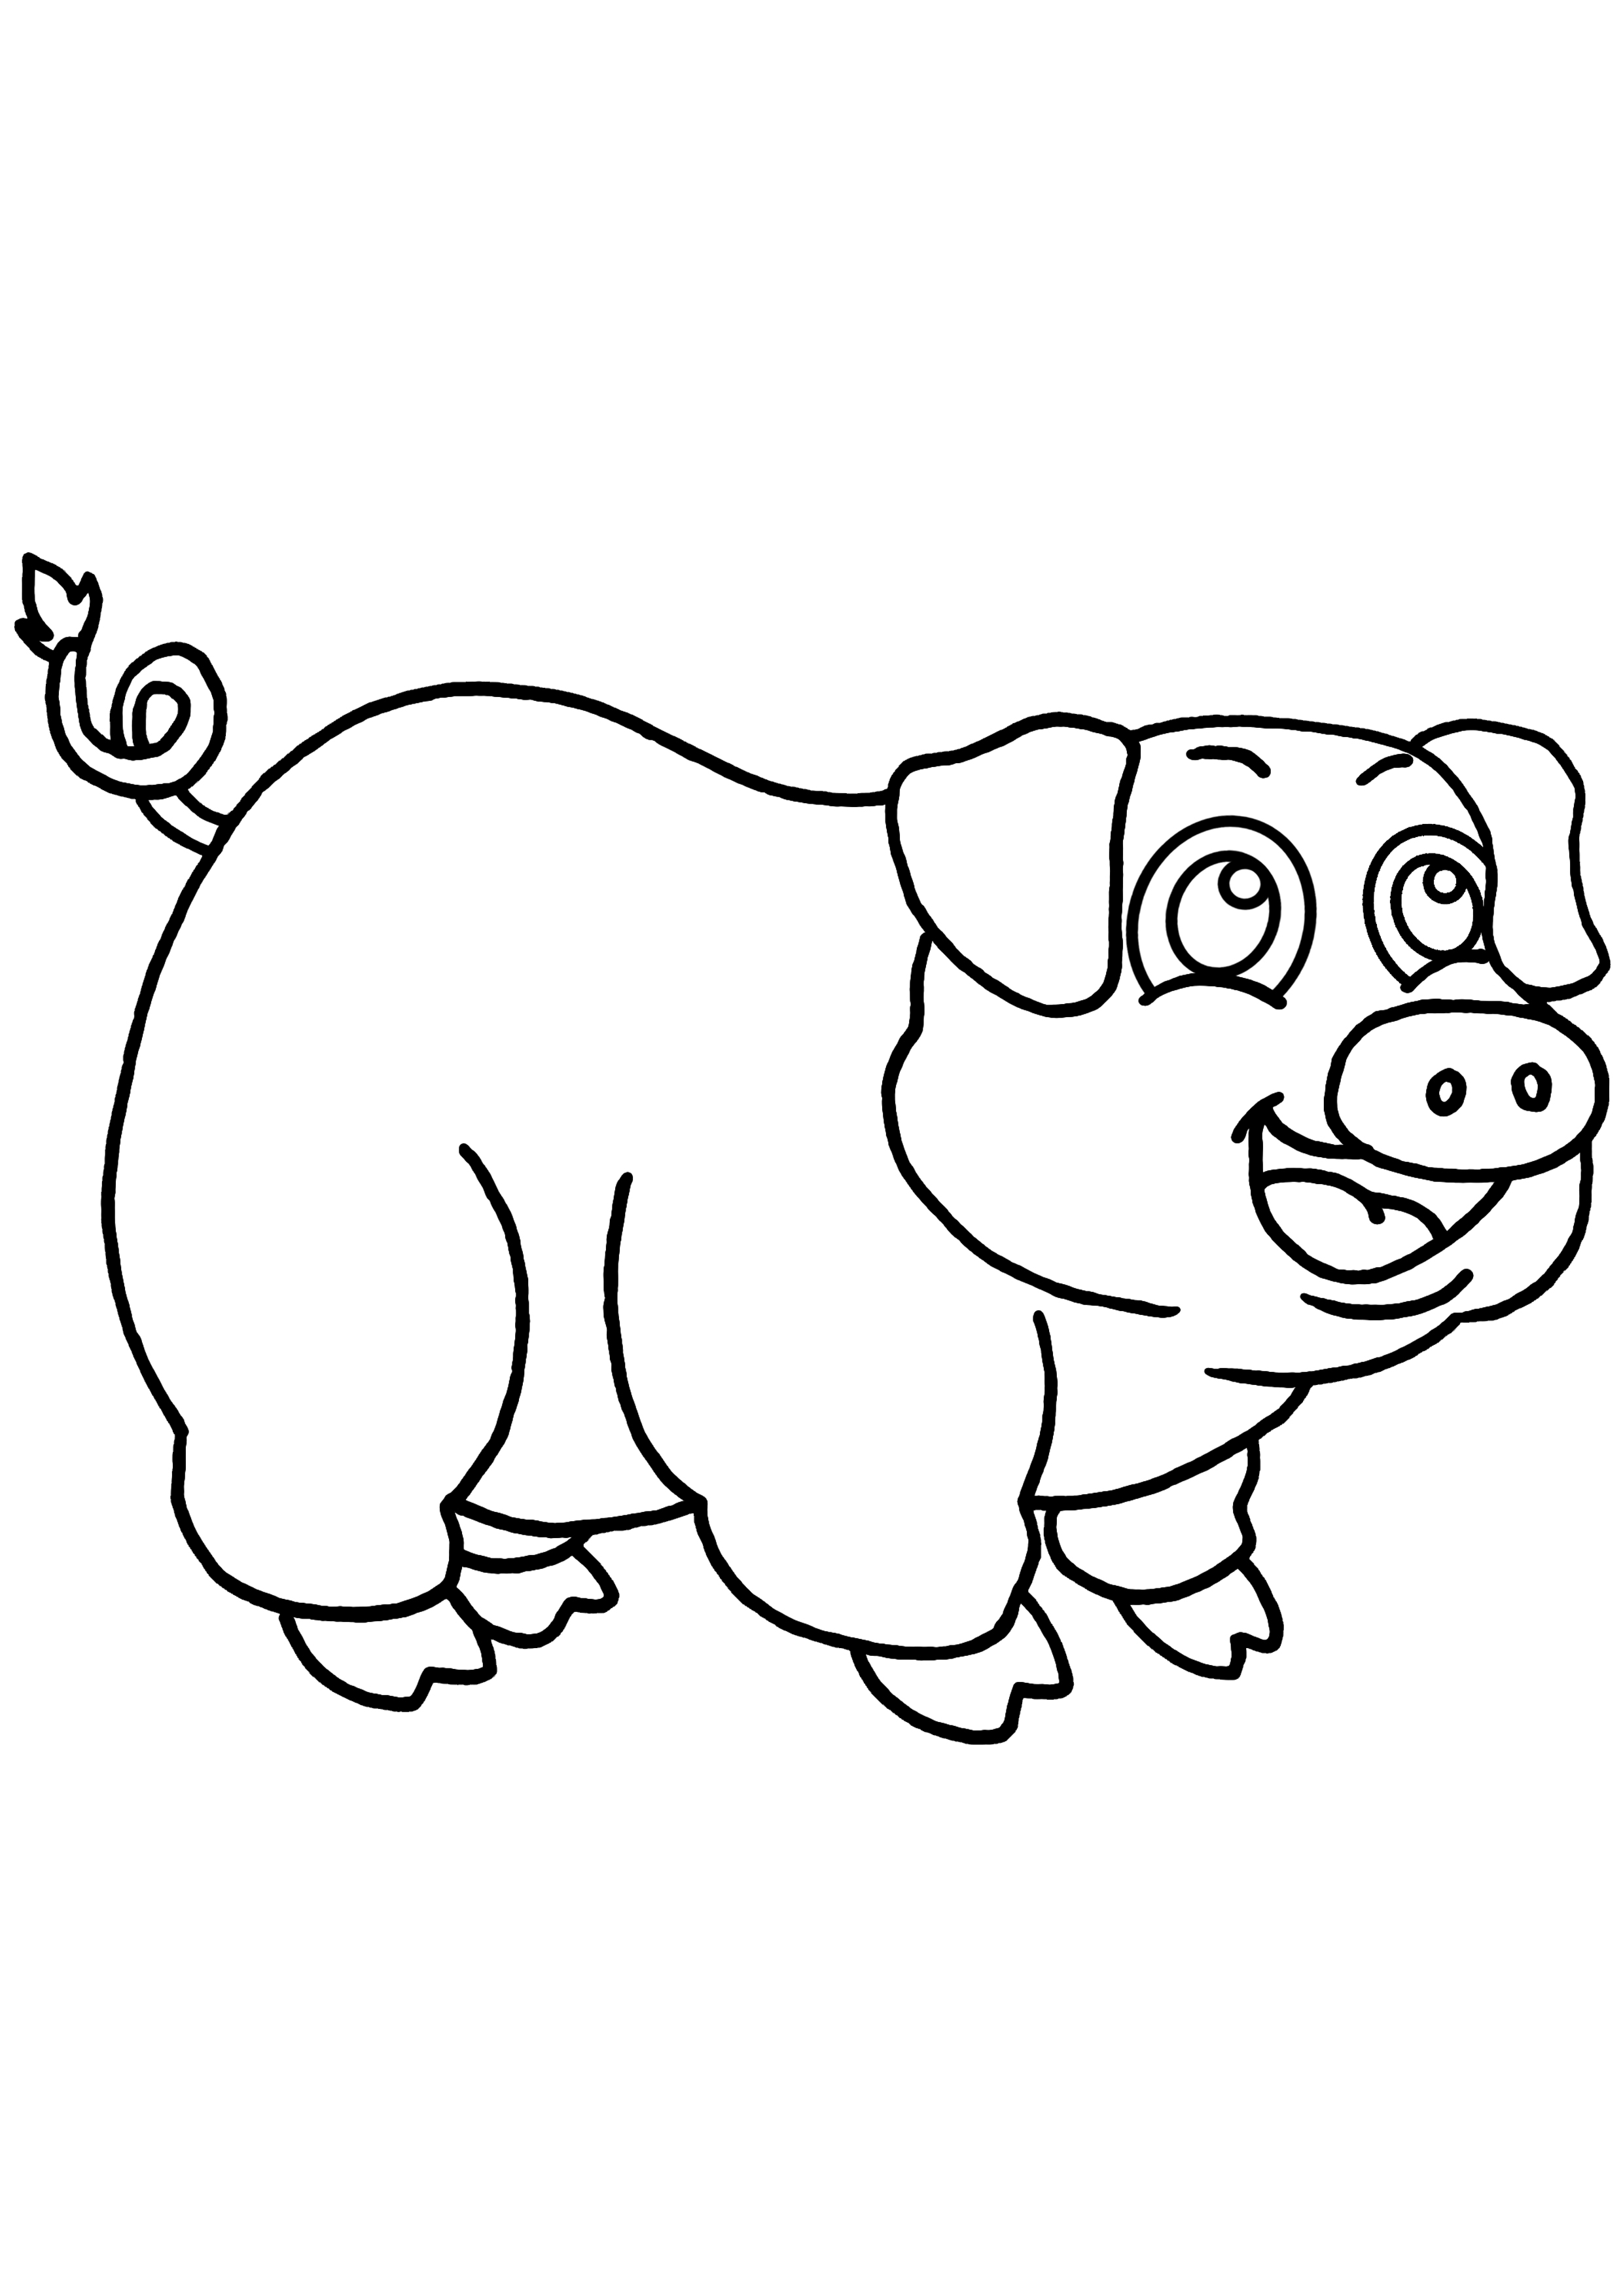 Pig #3620 (Animals) – Printable coloring pages